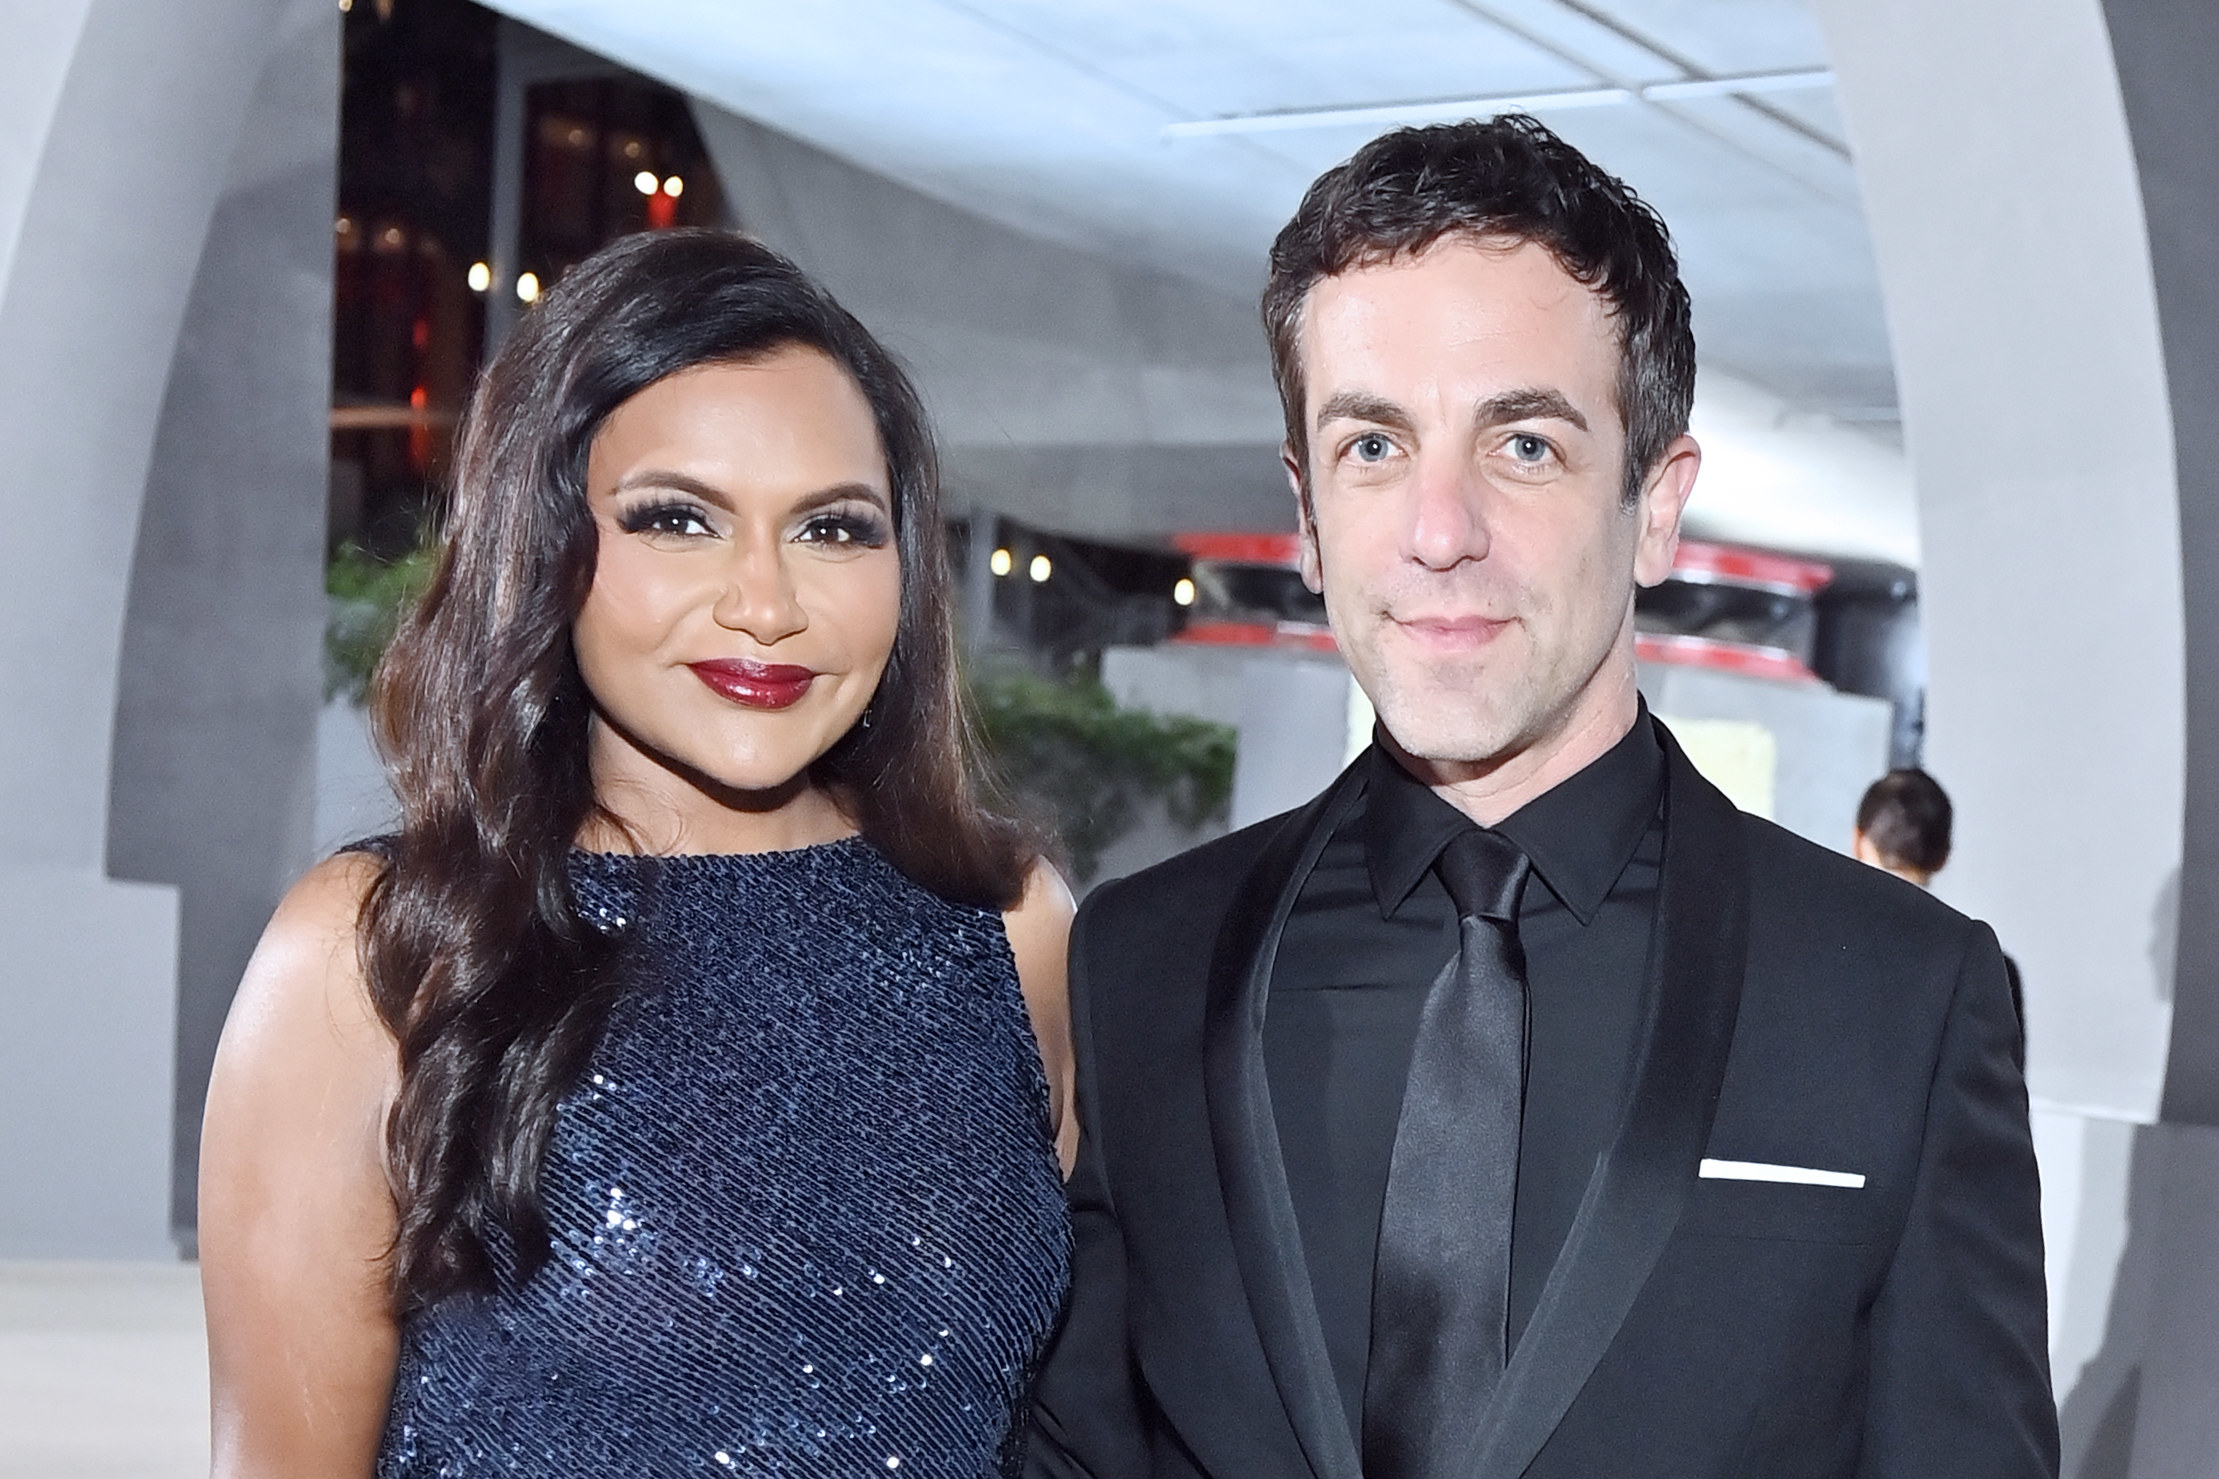 Mindy Kaling and B. J. Novak attend the Academy Museum of Motion Pictures 2nd Annual Gala presented by Rolex at Academy Museum of Motion Pictures on October 15, 2022